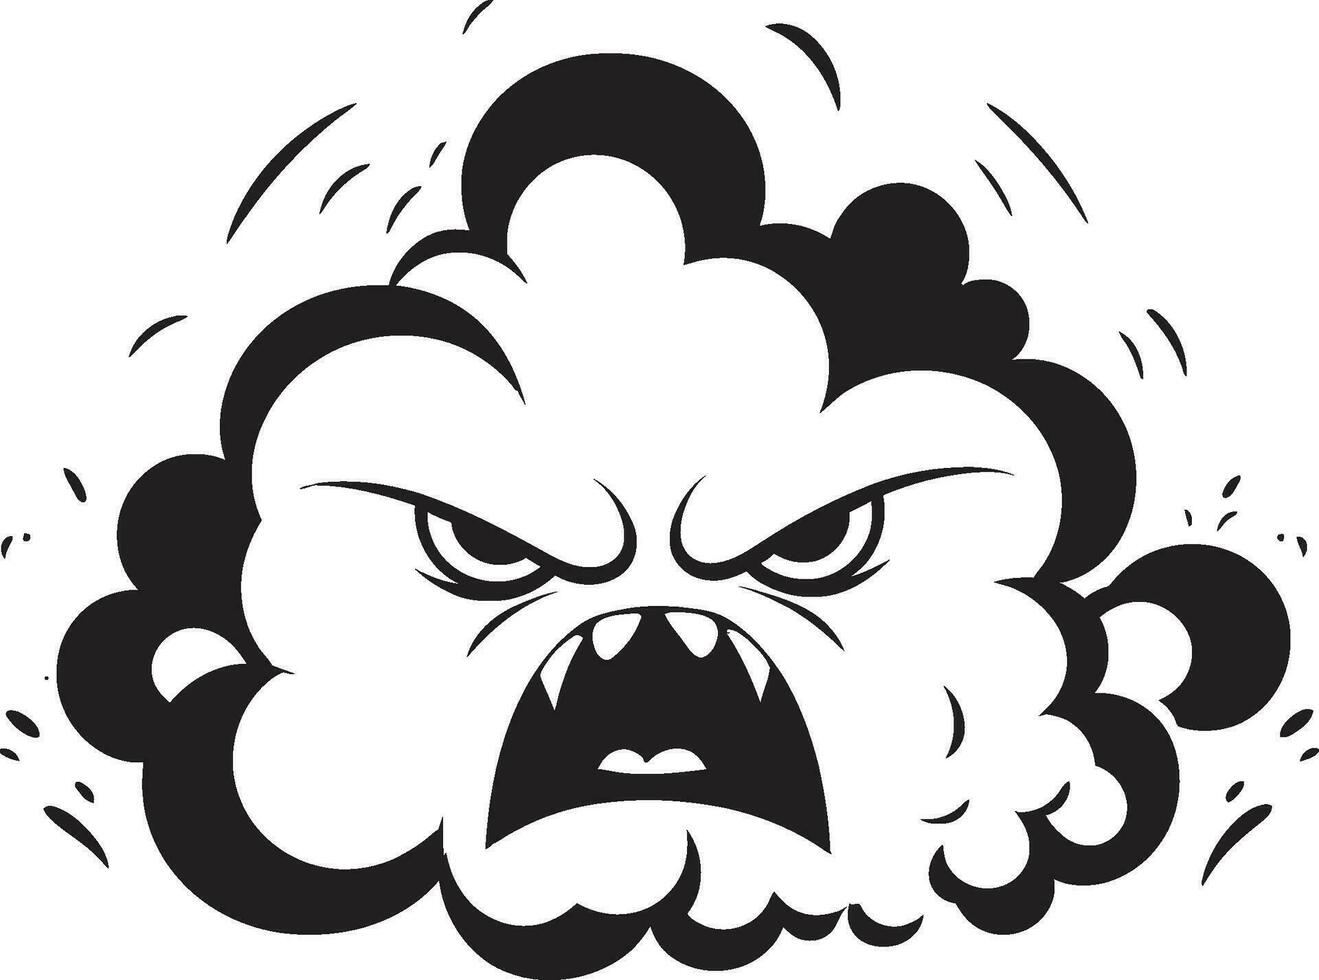 Brooding Tempest Vector Angry Cloud Icon Vexed Vapor Black Angry Cloud Logo